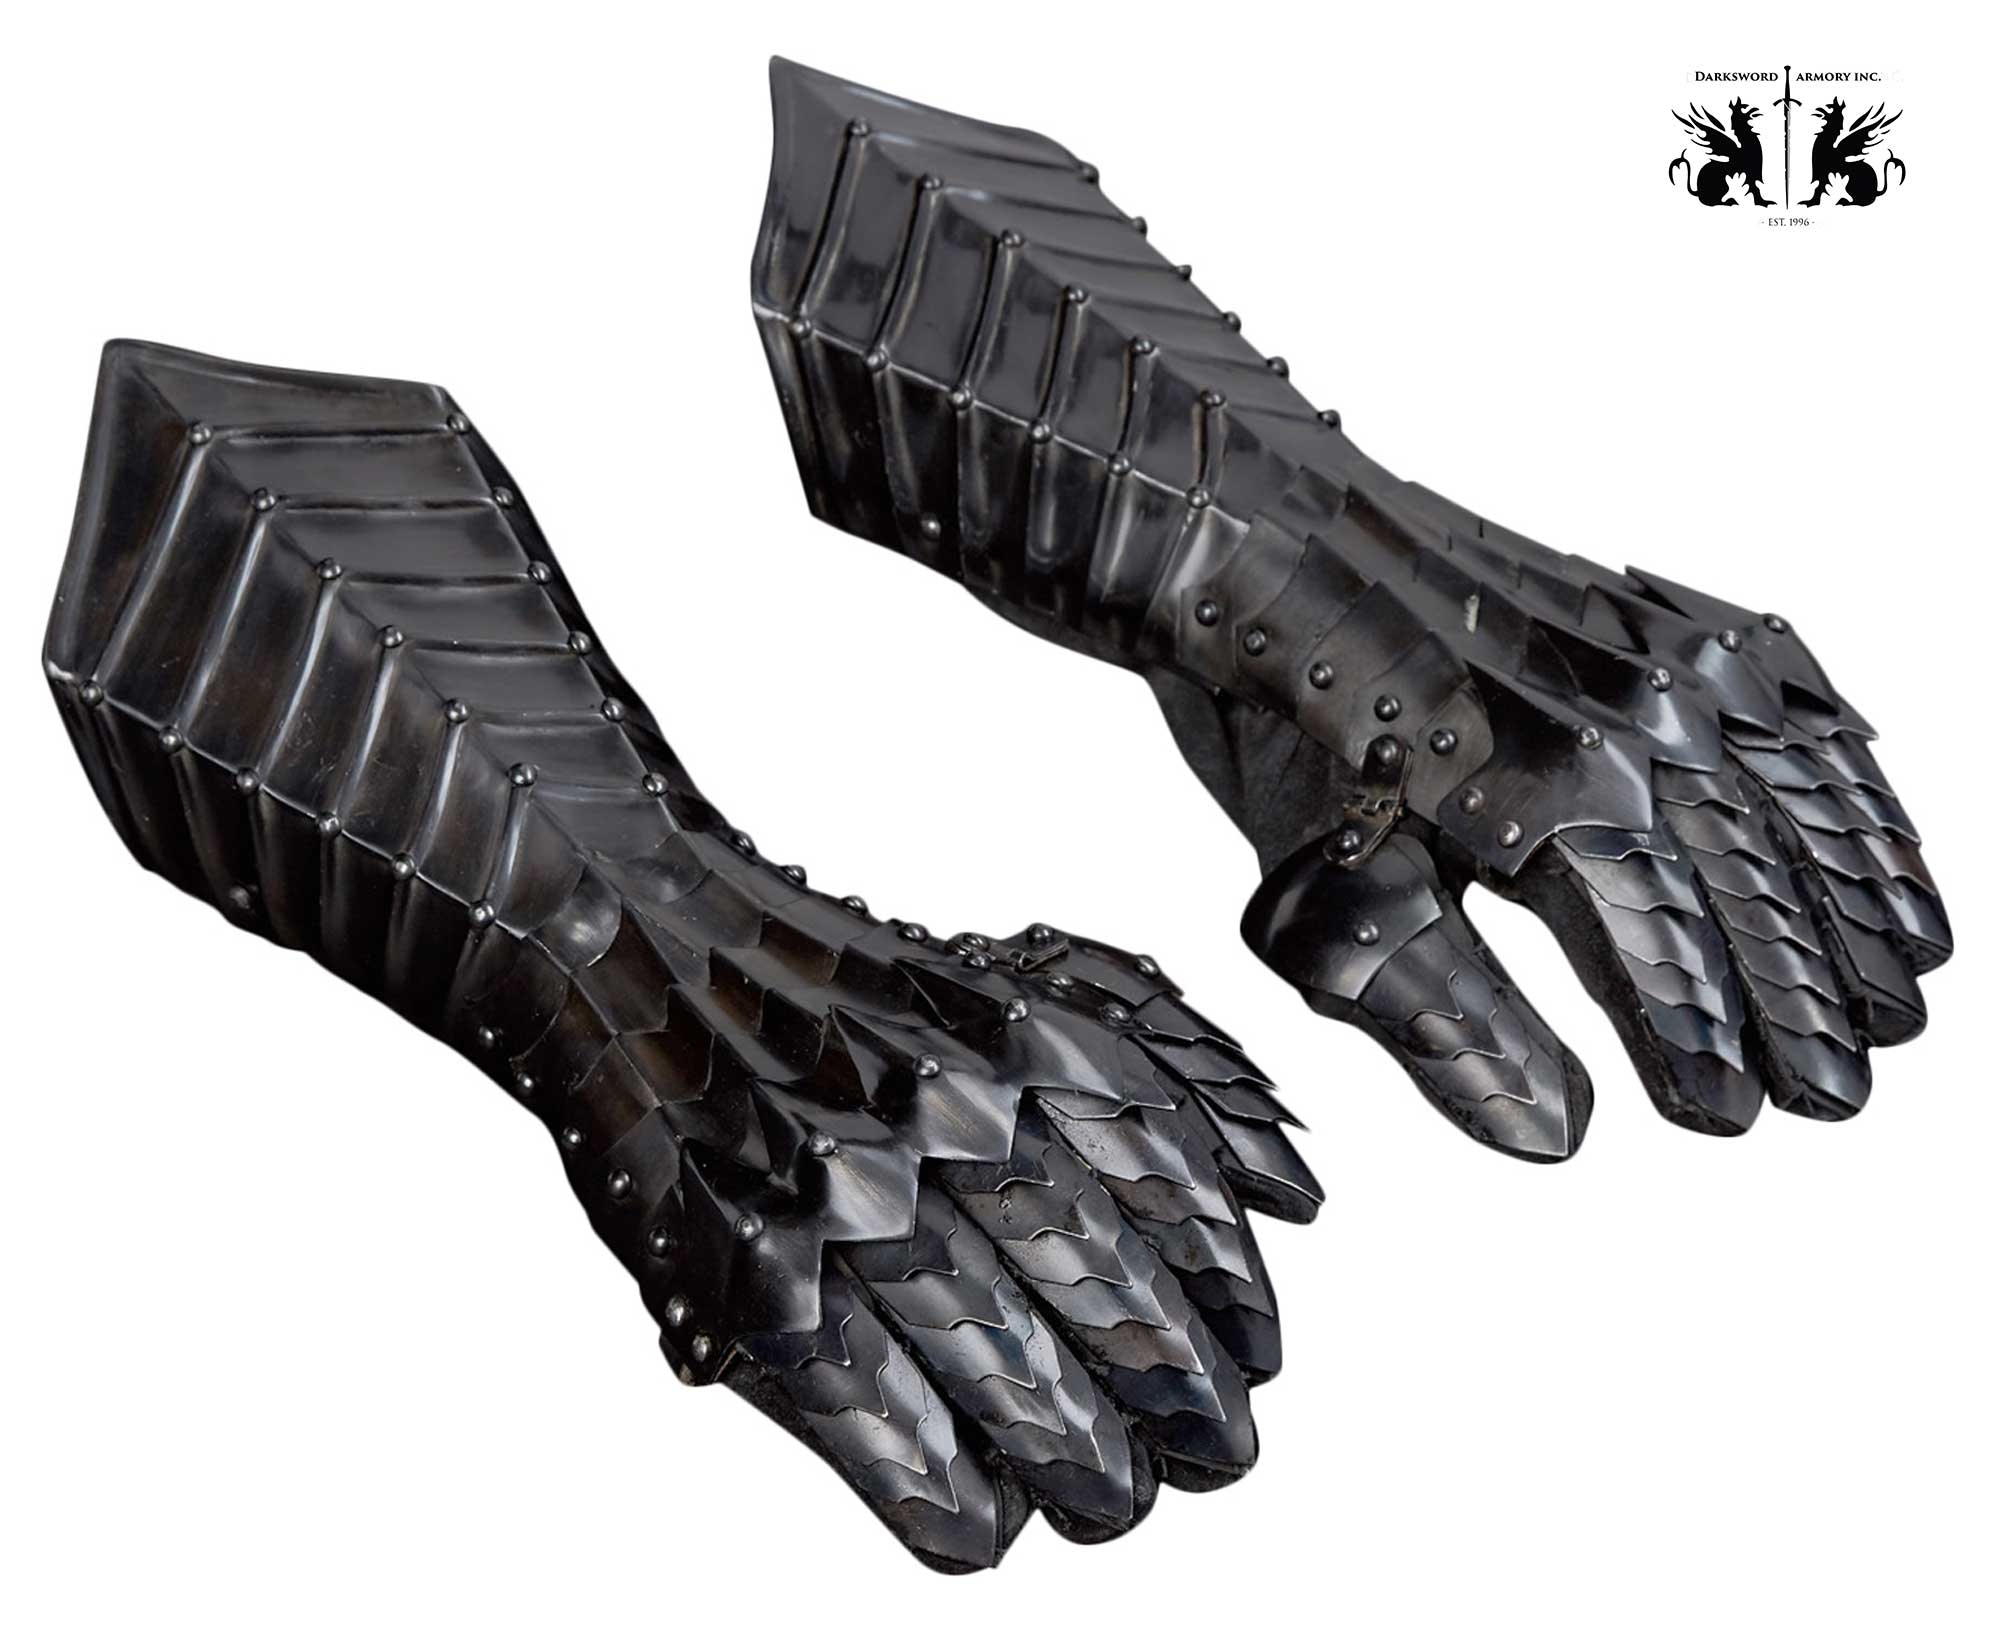 gothic-fantasy-gauntlets-medieval-armor-lotr-lord-of-the-rings-nazgul-1705.jpg